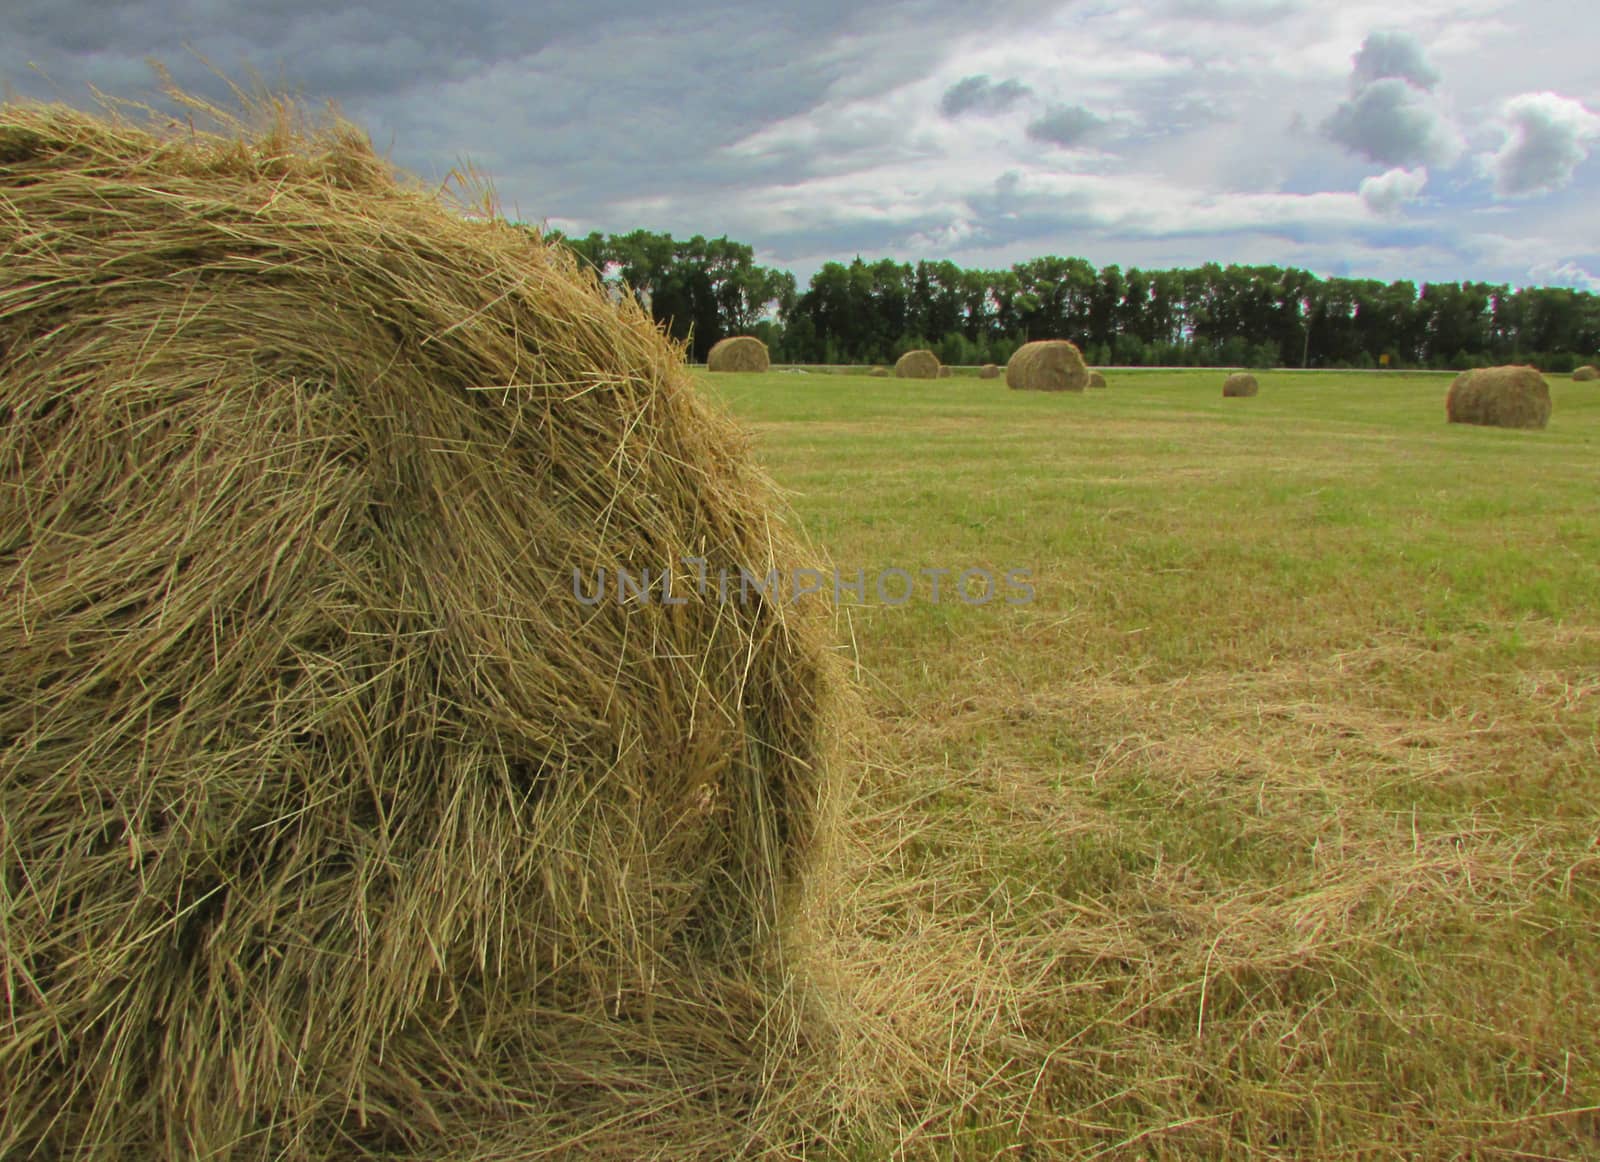 Stack cut hay on the background of a great storm clouds and the upcoming weather